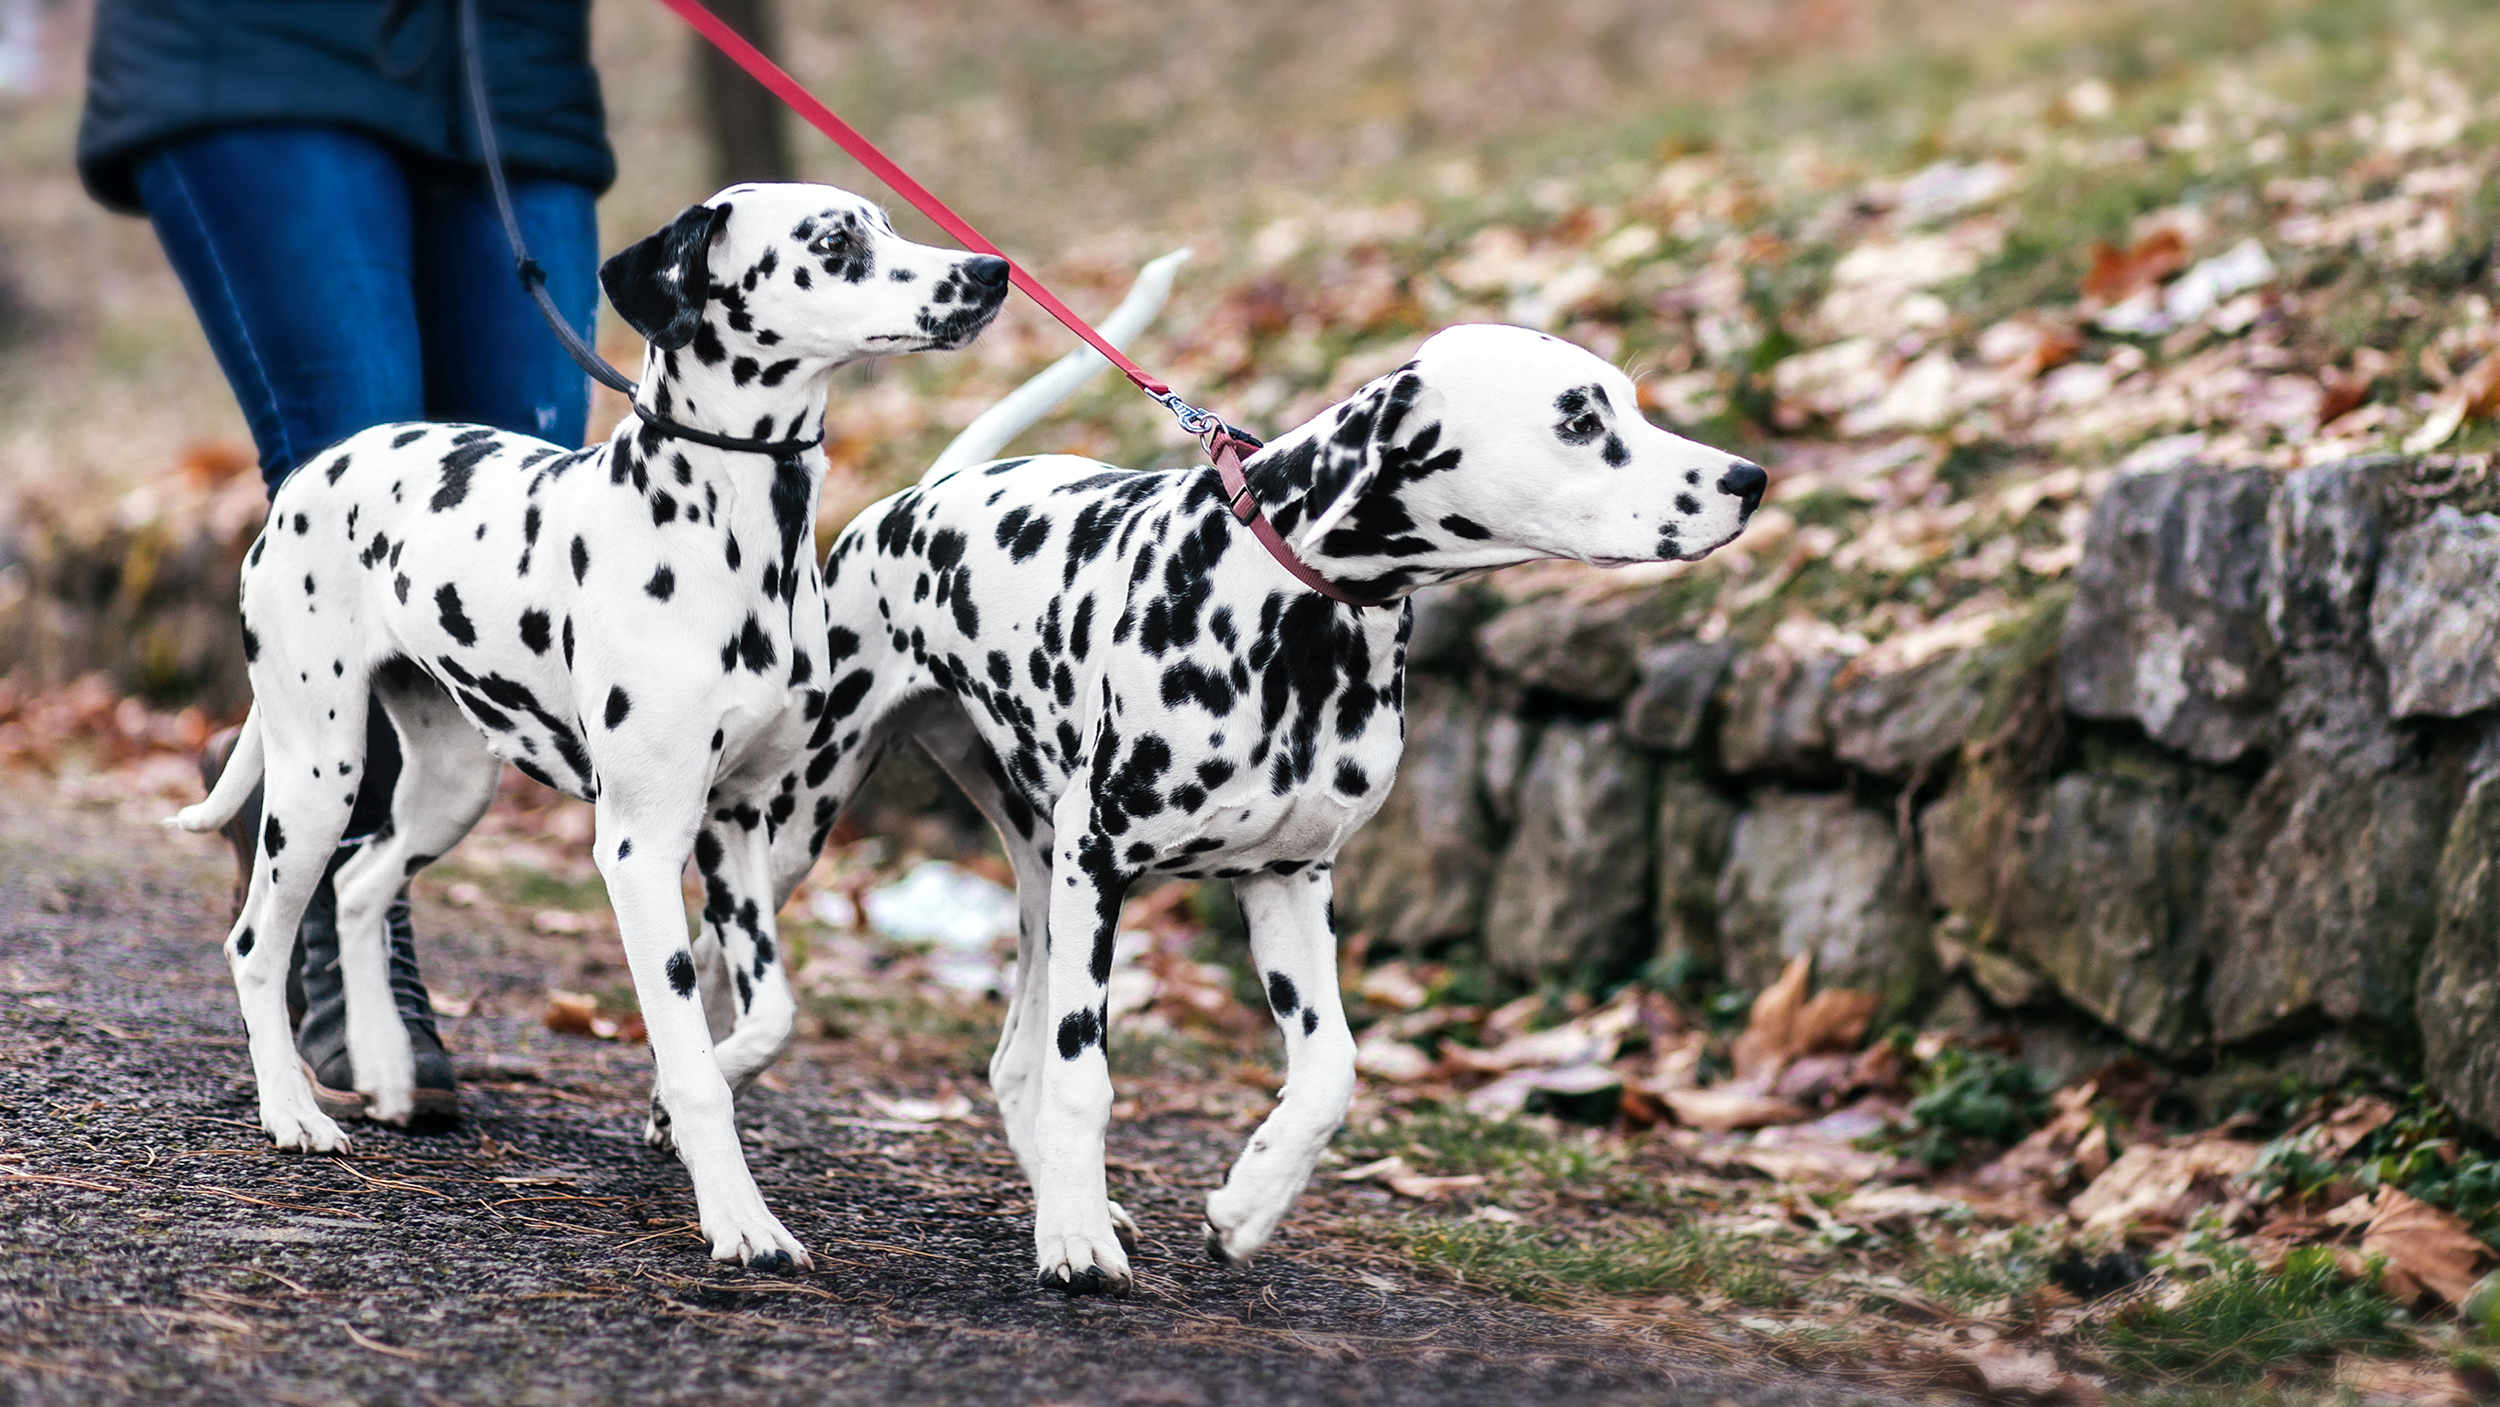 Adult Dalmatians walking outdoors on a pavement surrounded by fallen leaves.